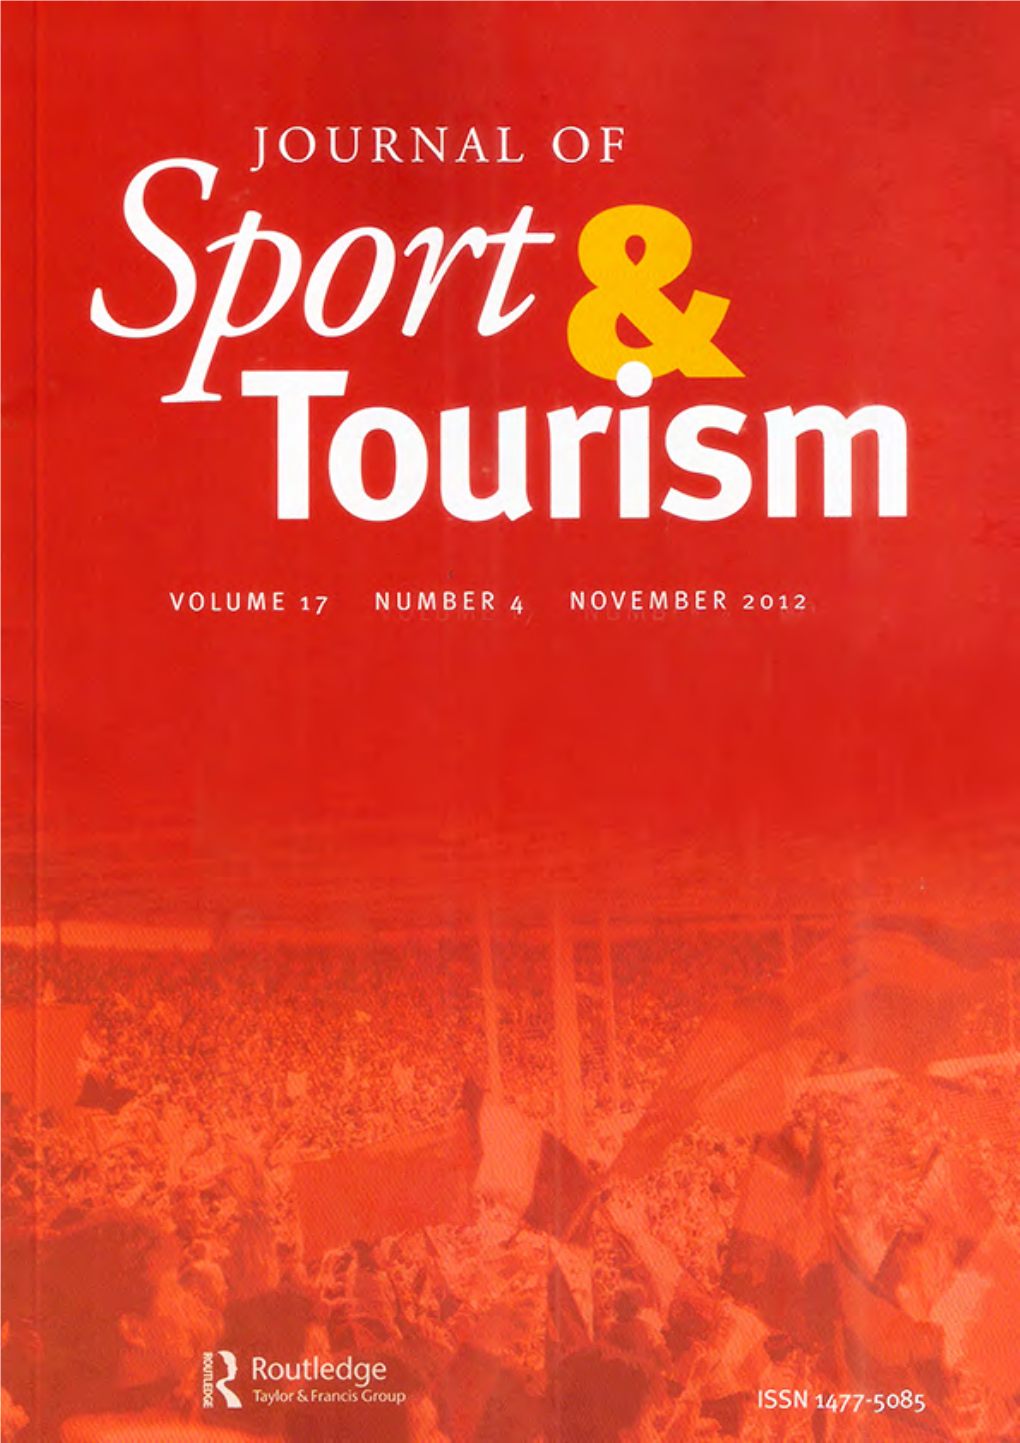 A Systematic Review of Surf Tourism Research (1997–2011) Steven Andrew Martin∗ & Ilian Assenov